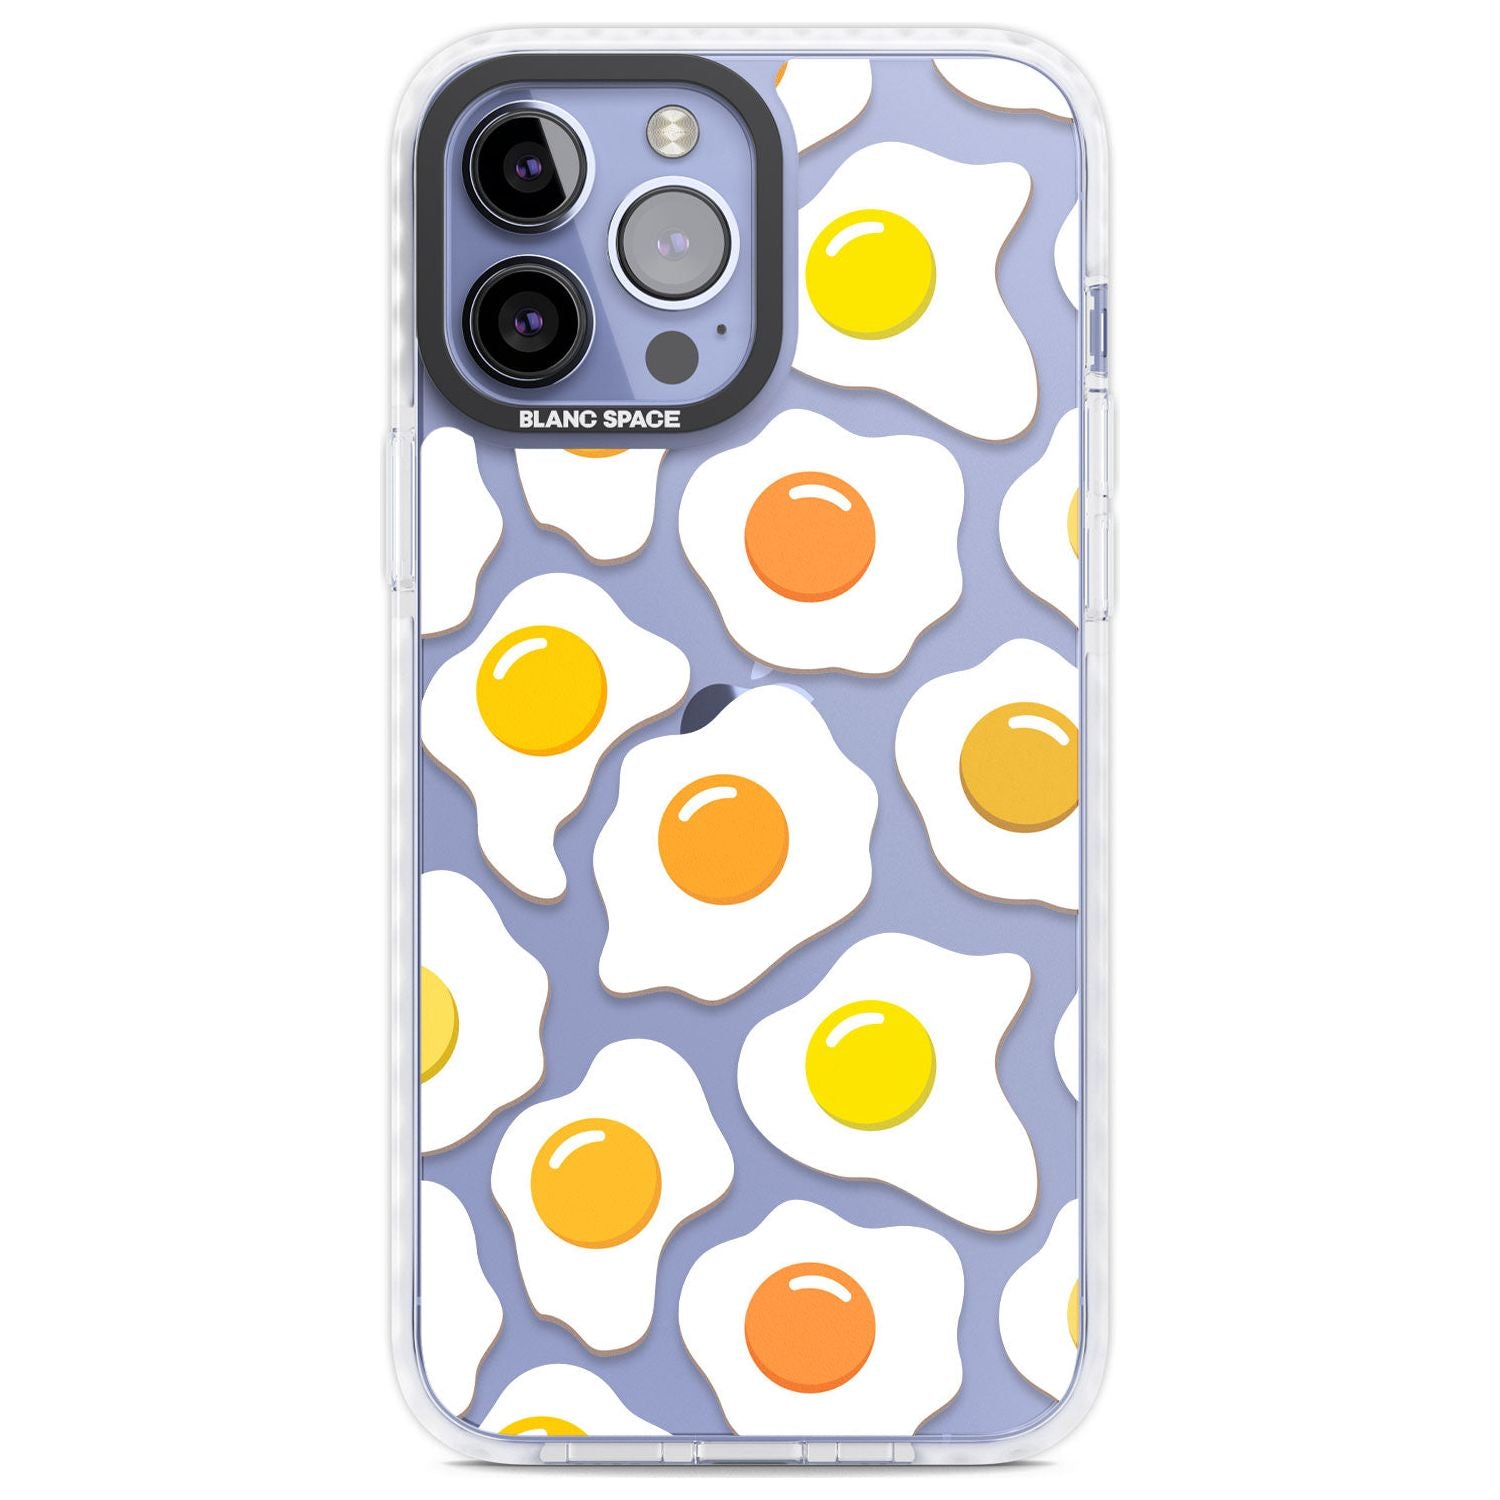 Fried Egg Pattern Phone Case iPhone 13 Pro Max / Impact Case,iPhone 14 Pro Max / Impact Case Blanc Space